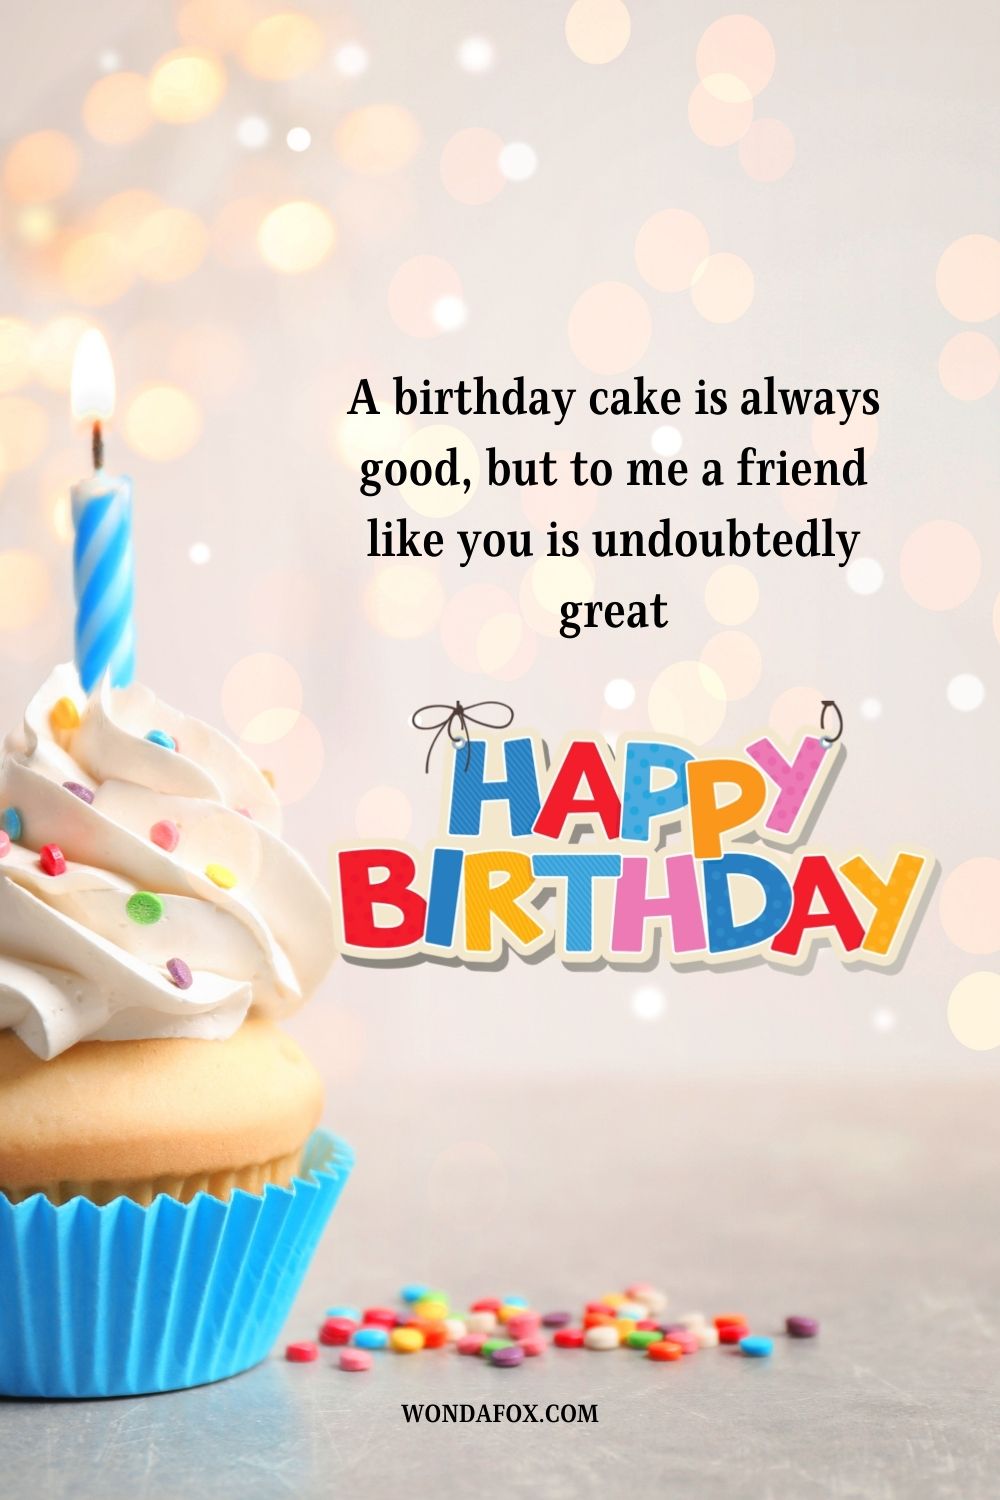 A birthday cake is always good, but to me a friend like you is undoubtedly great. Happy Birthday.